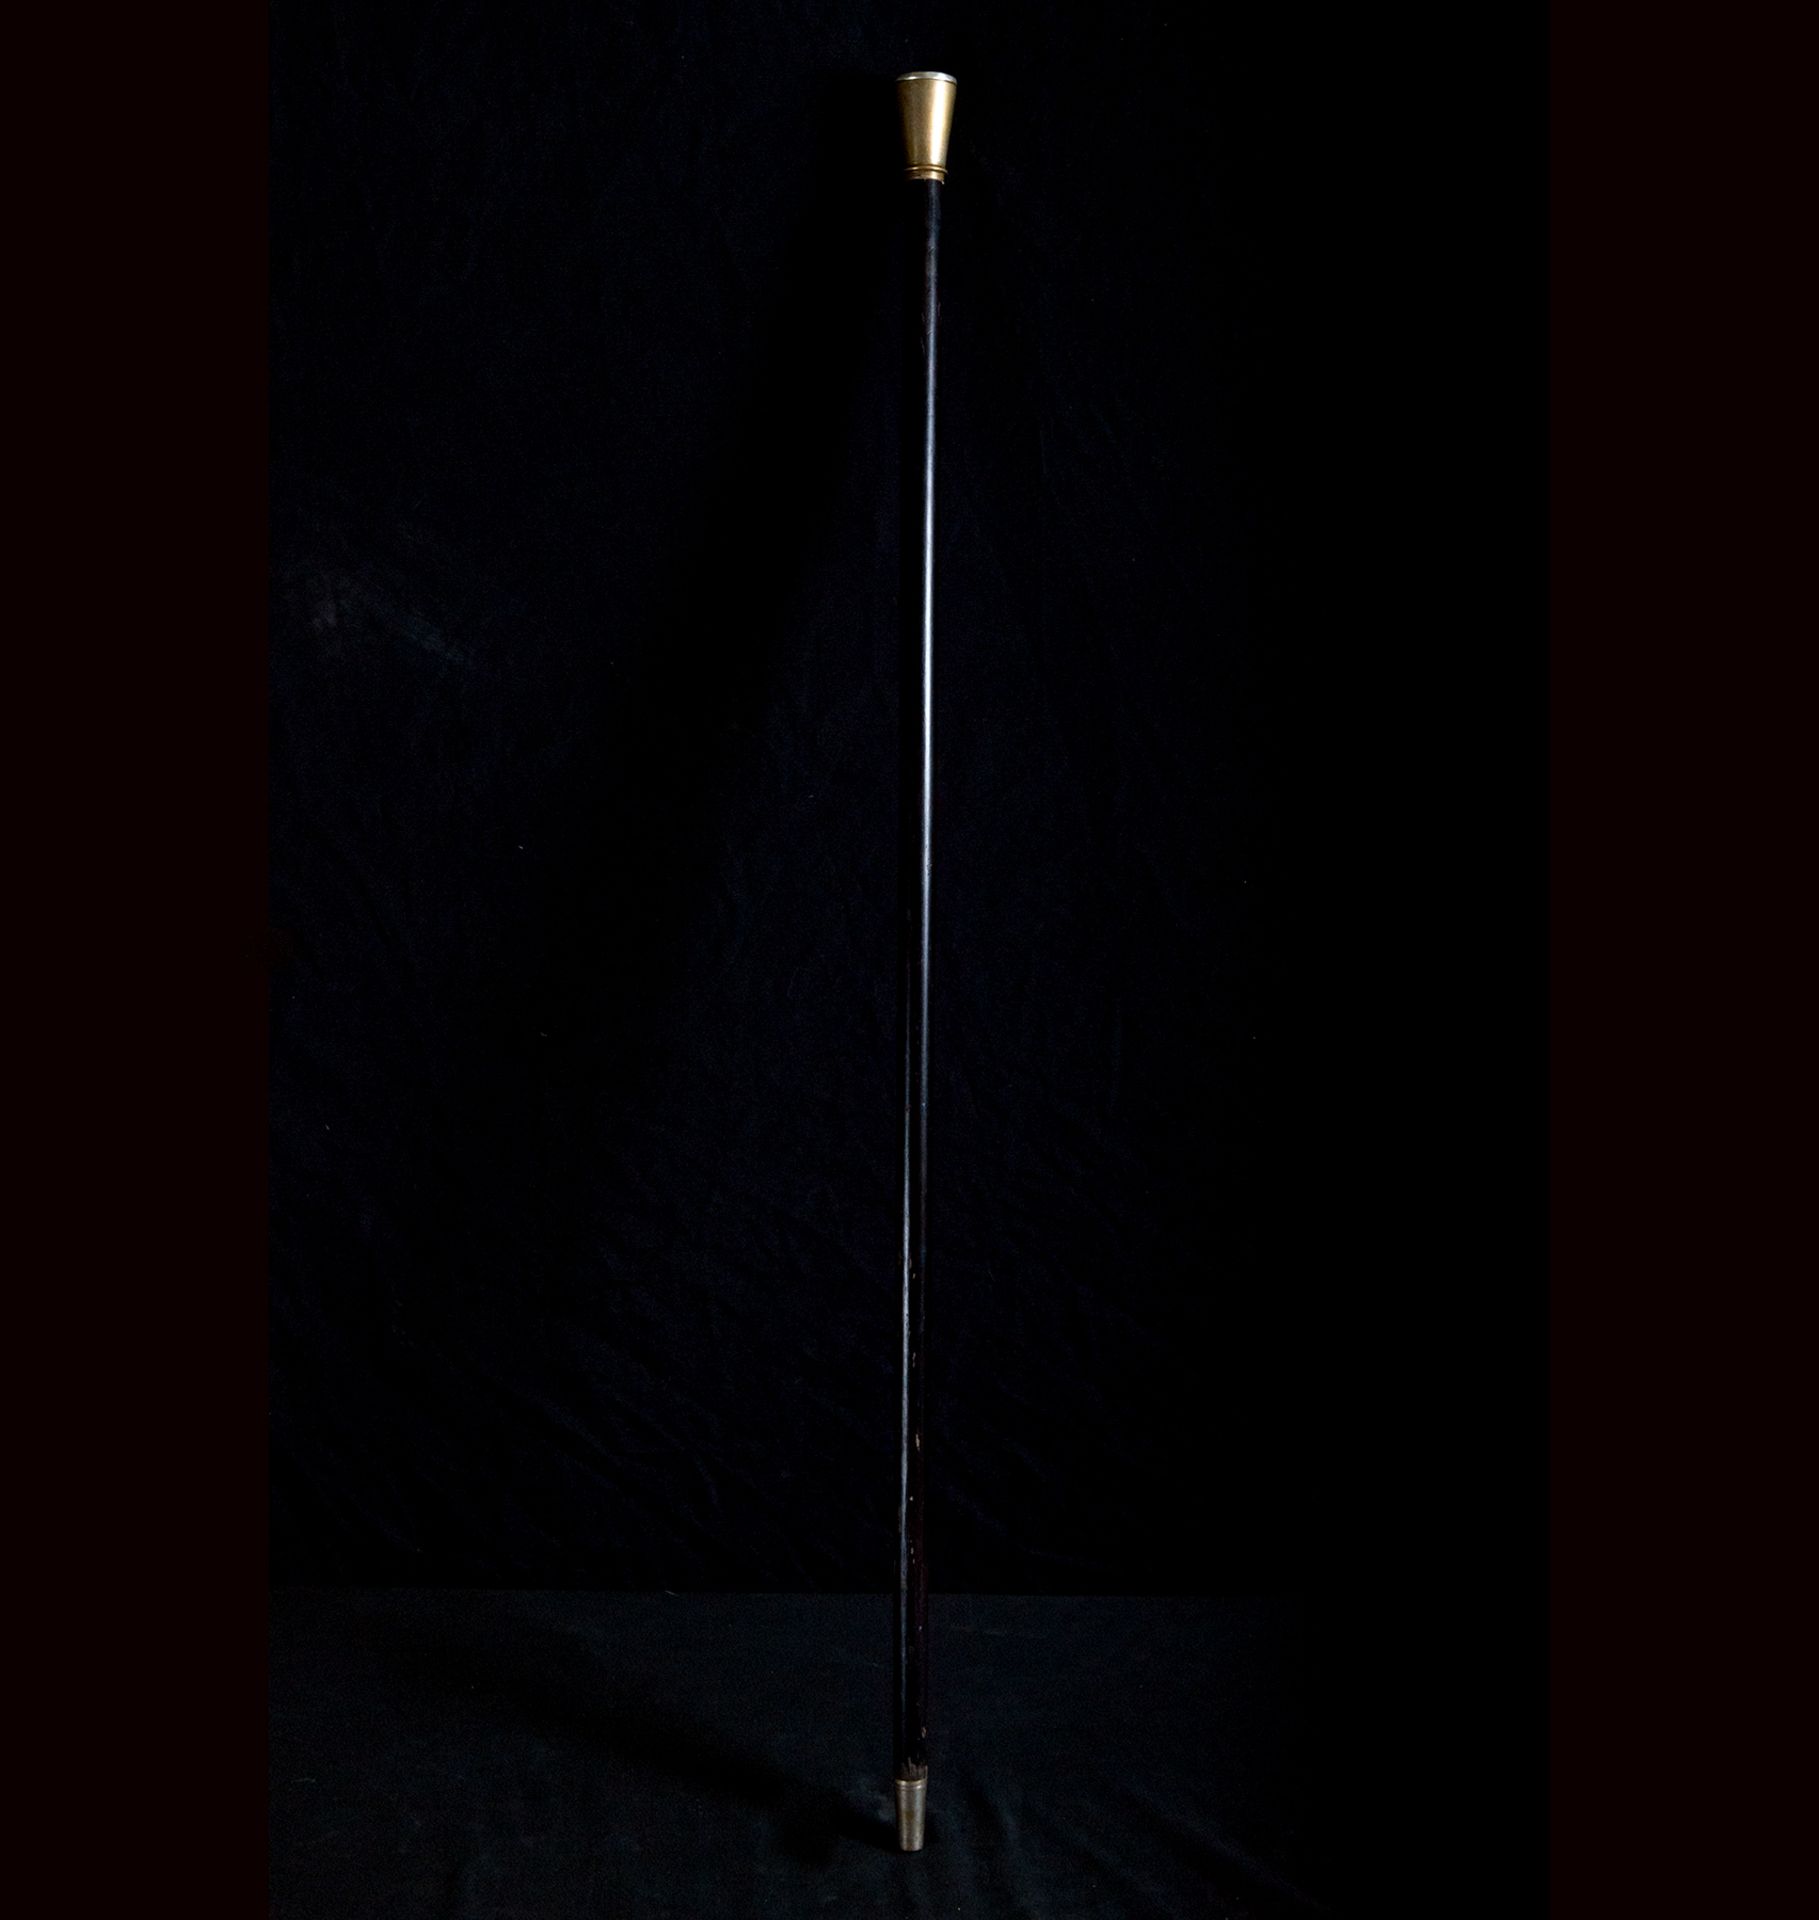 Marquis cane with silver handle topped with a Royal Crown, 19th century - Image 2 of 4